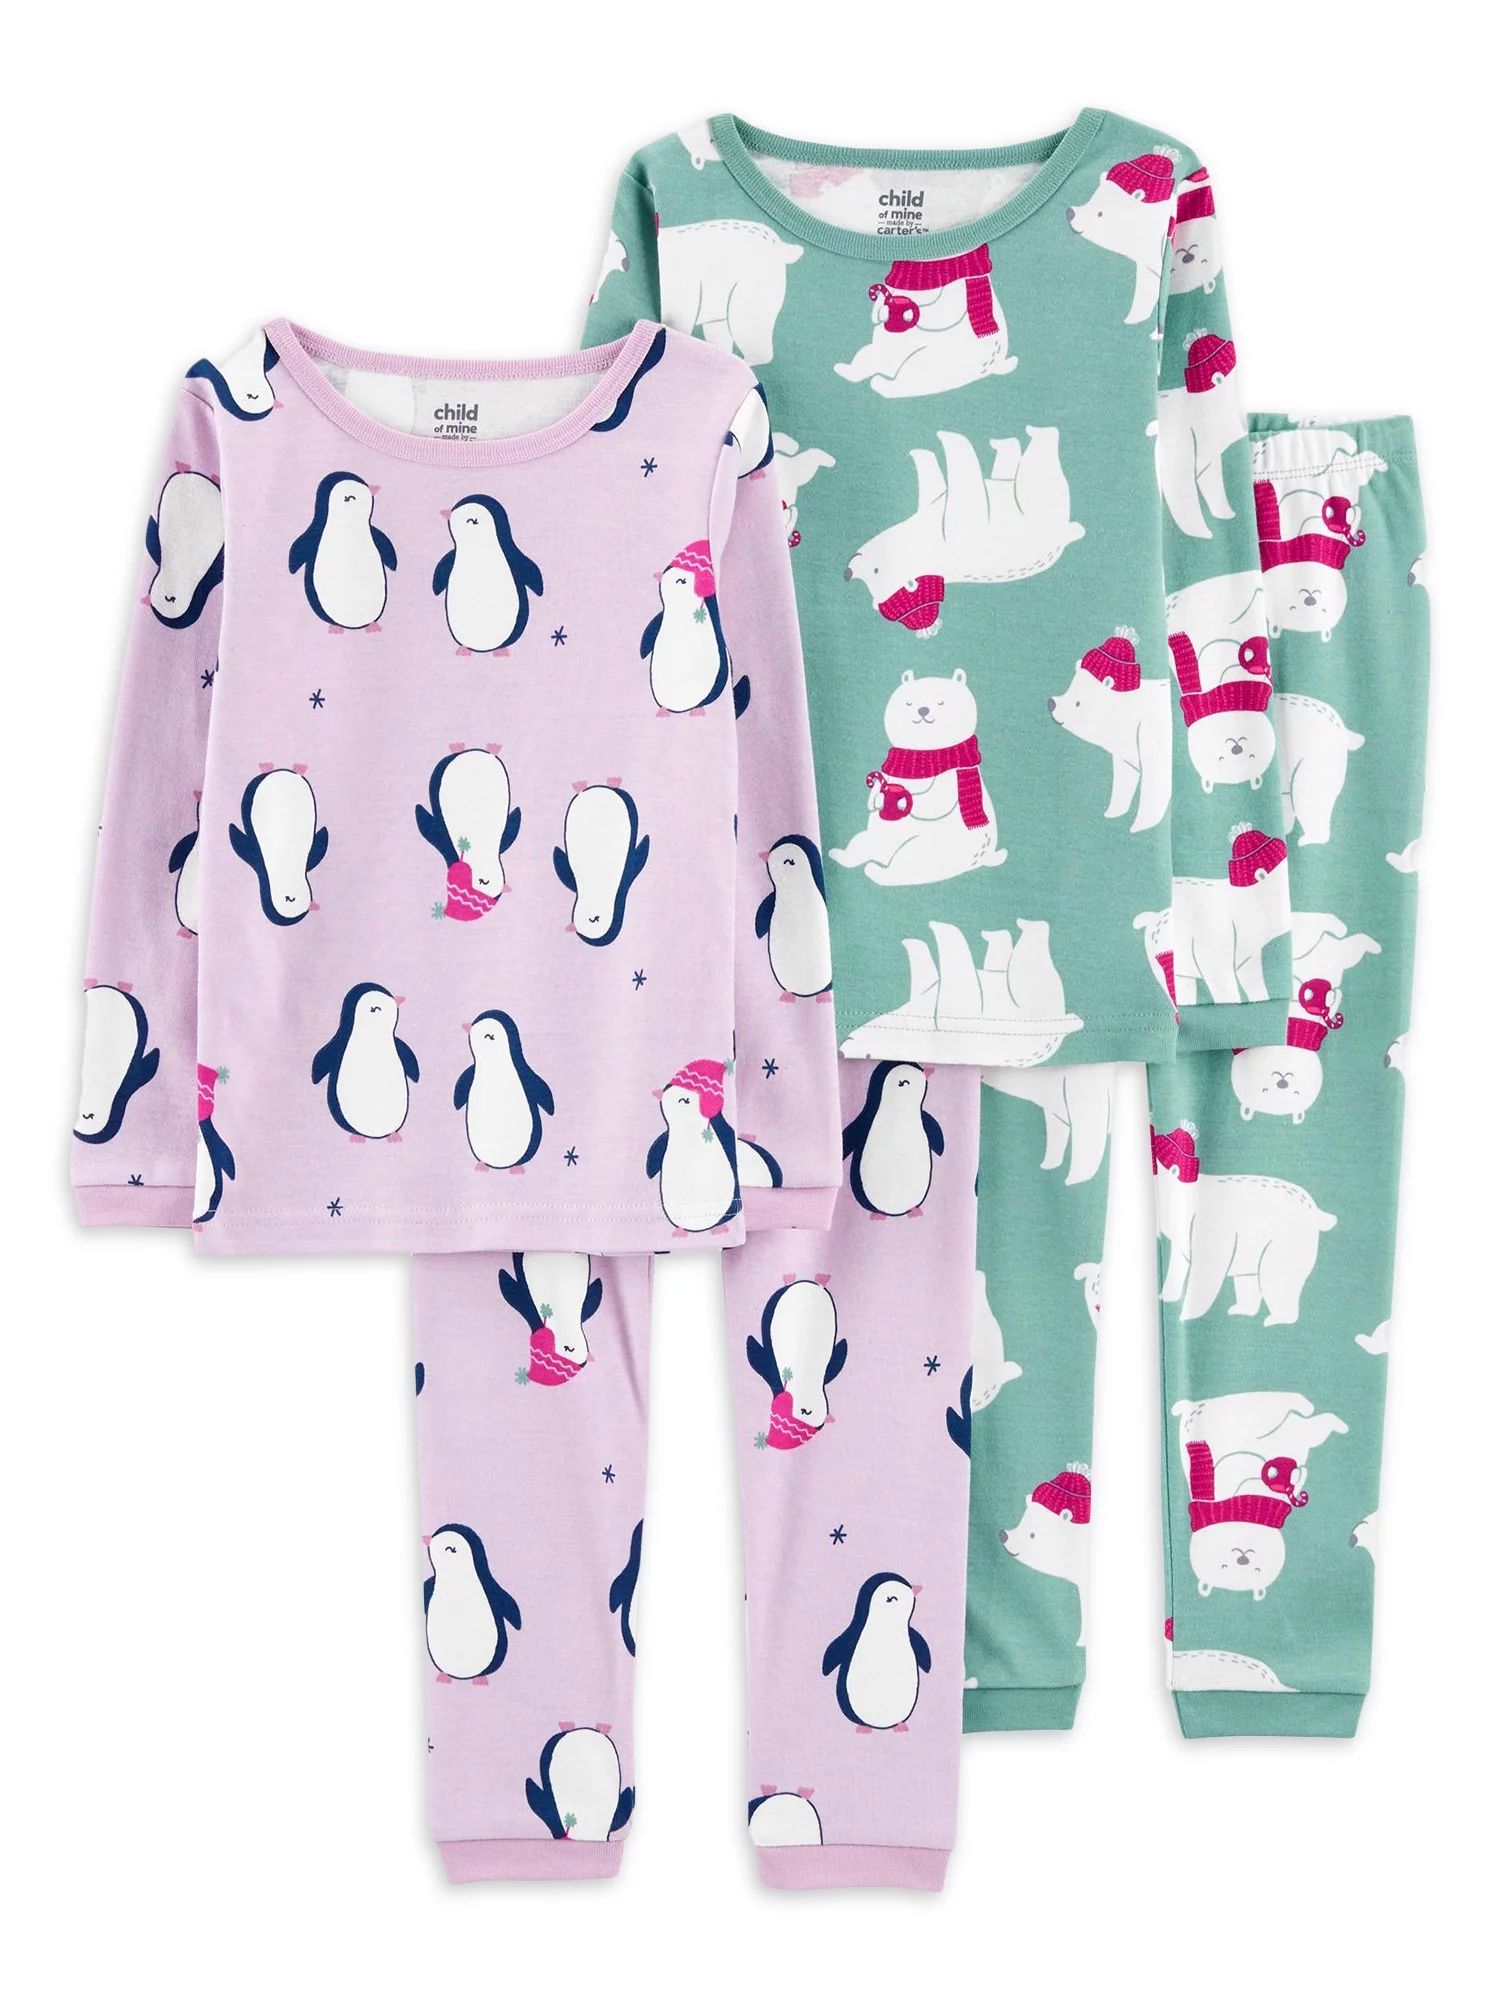 Carter's Child of Mine Baby and Toddler Girl Pajama Set, 2-Pack, 2-Piece, Size 12M-5T | Walmart (US)